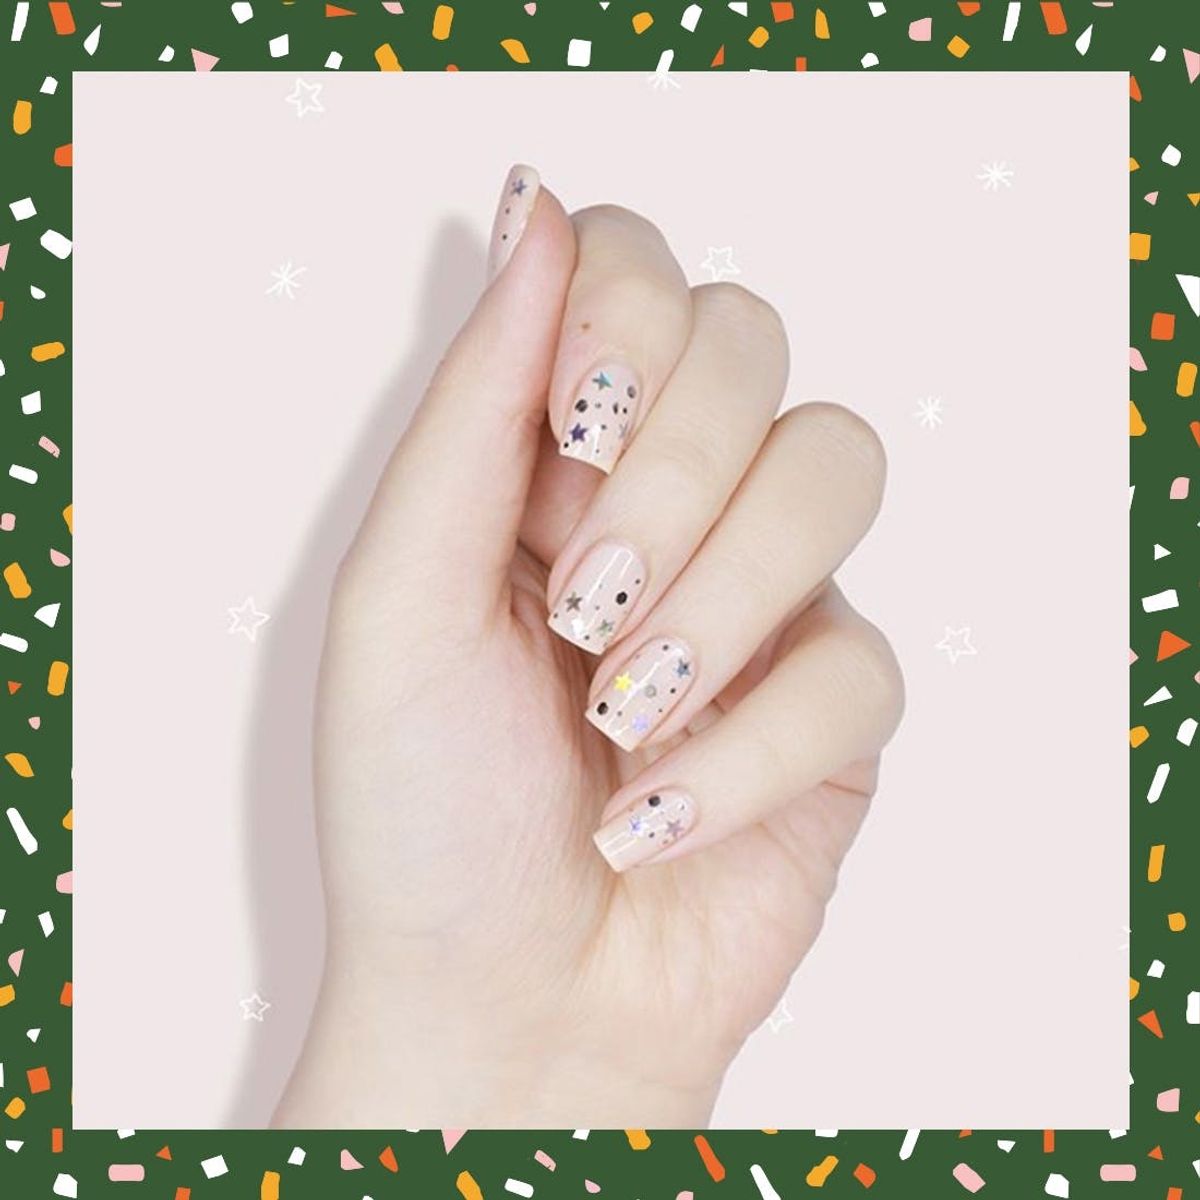 11 Confetti-Inspired Nail Art Designs to Rock on New Year’s Eve